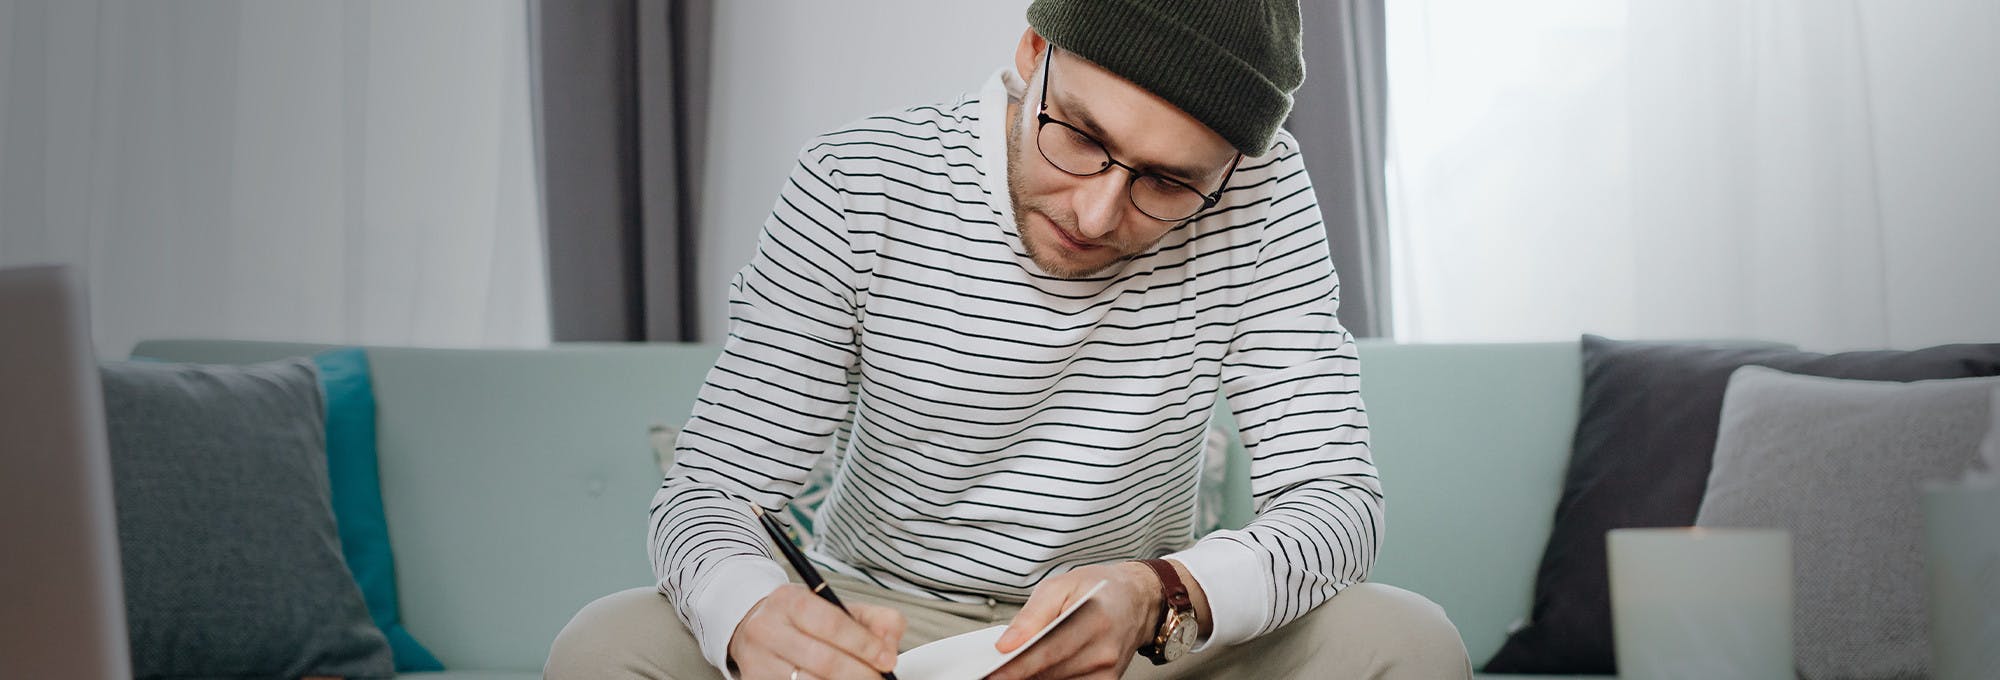 Male student with glasses on sitting and filling out application for a private student loan